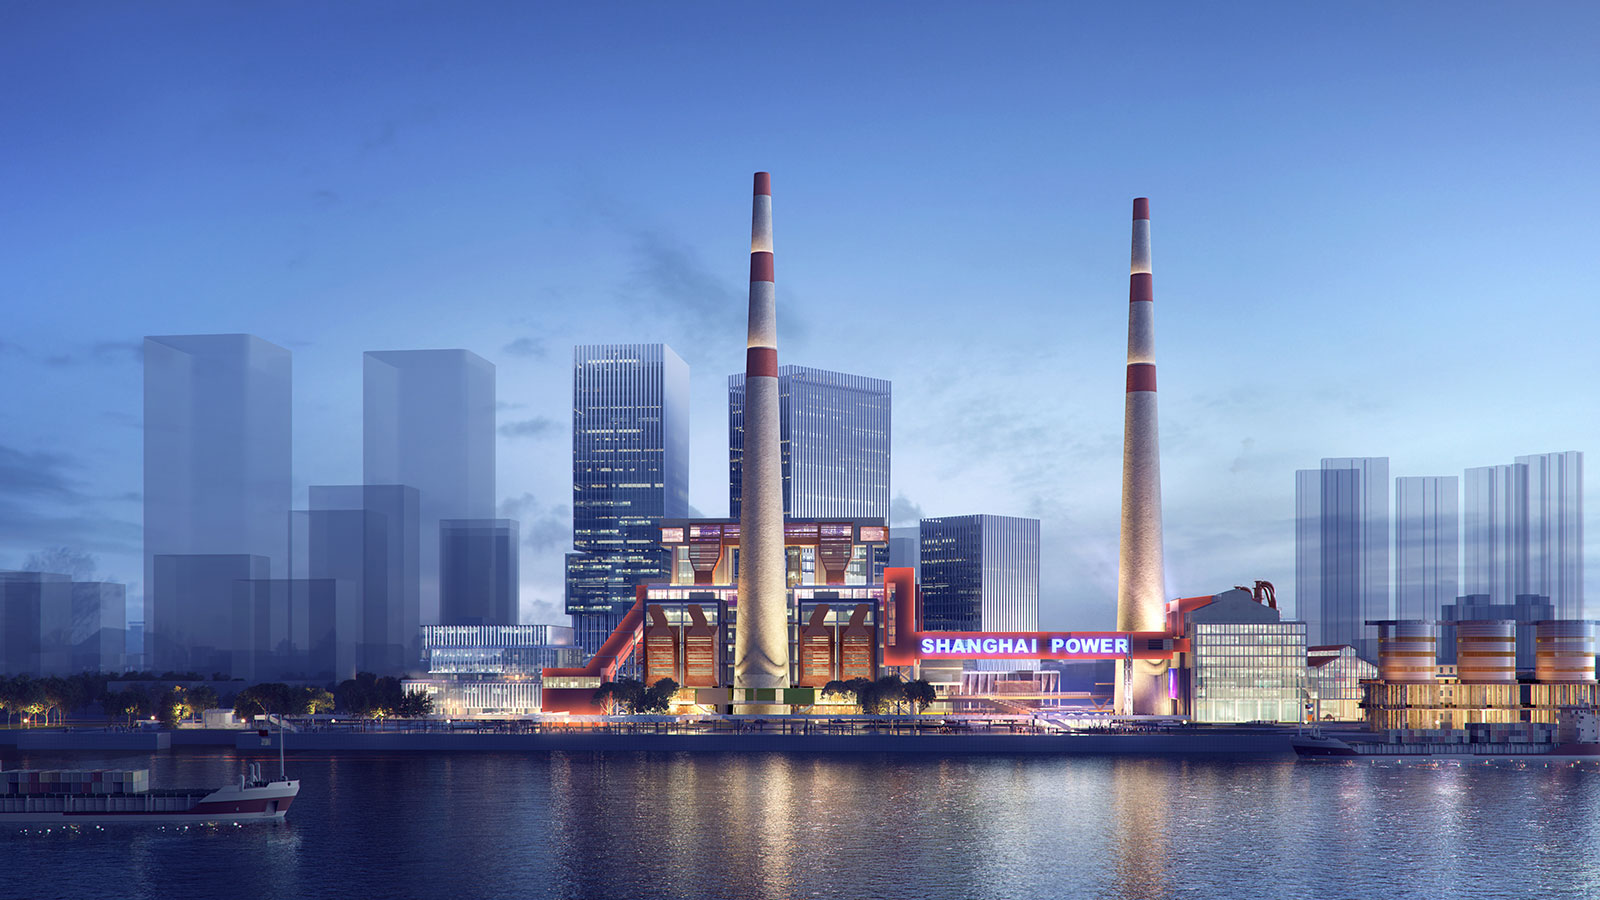 Shanghai Yangshupu is a former coal-fired power plant on the edge of the Huangpu River, the plant contains two historic power station buildings, associated waterside buildings and equipment.